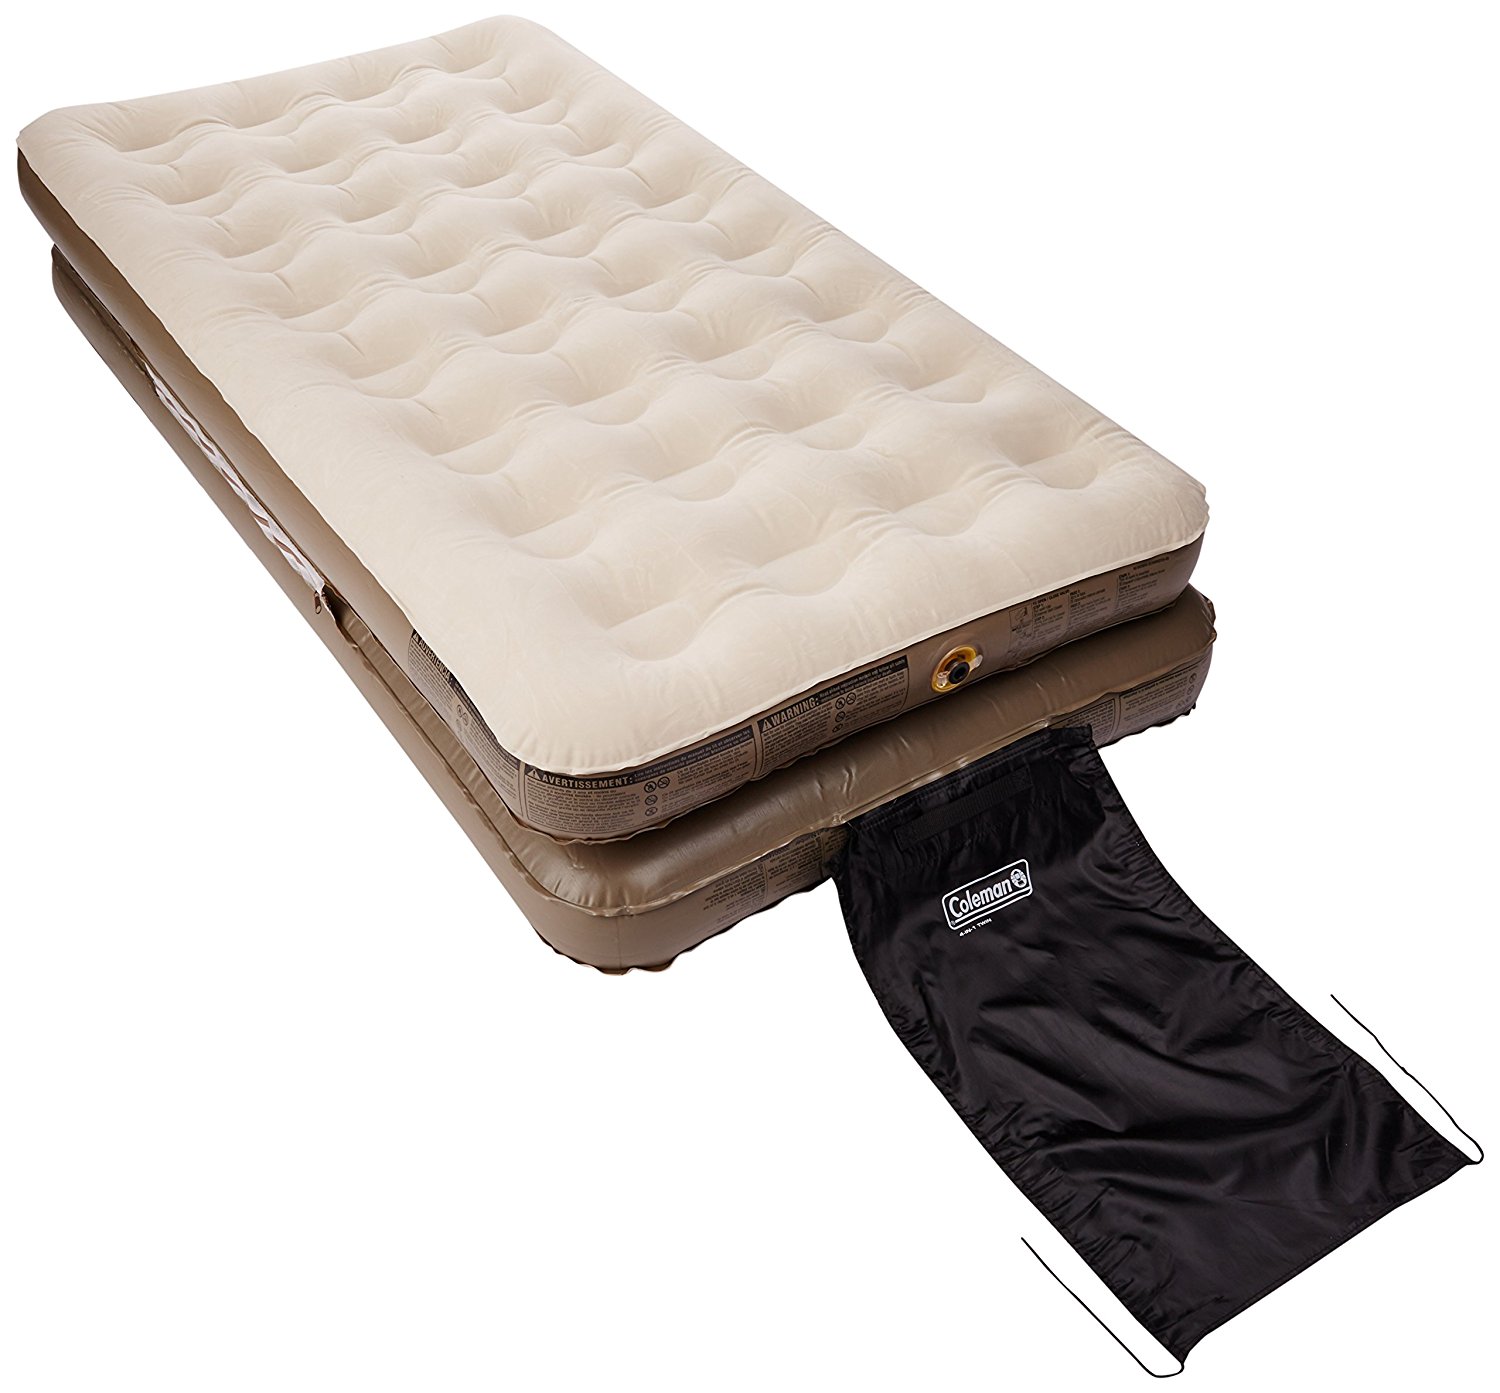 Top 10 Best Twin Size Air Mattresses in 2017 Reviews